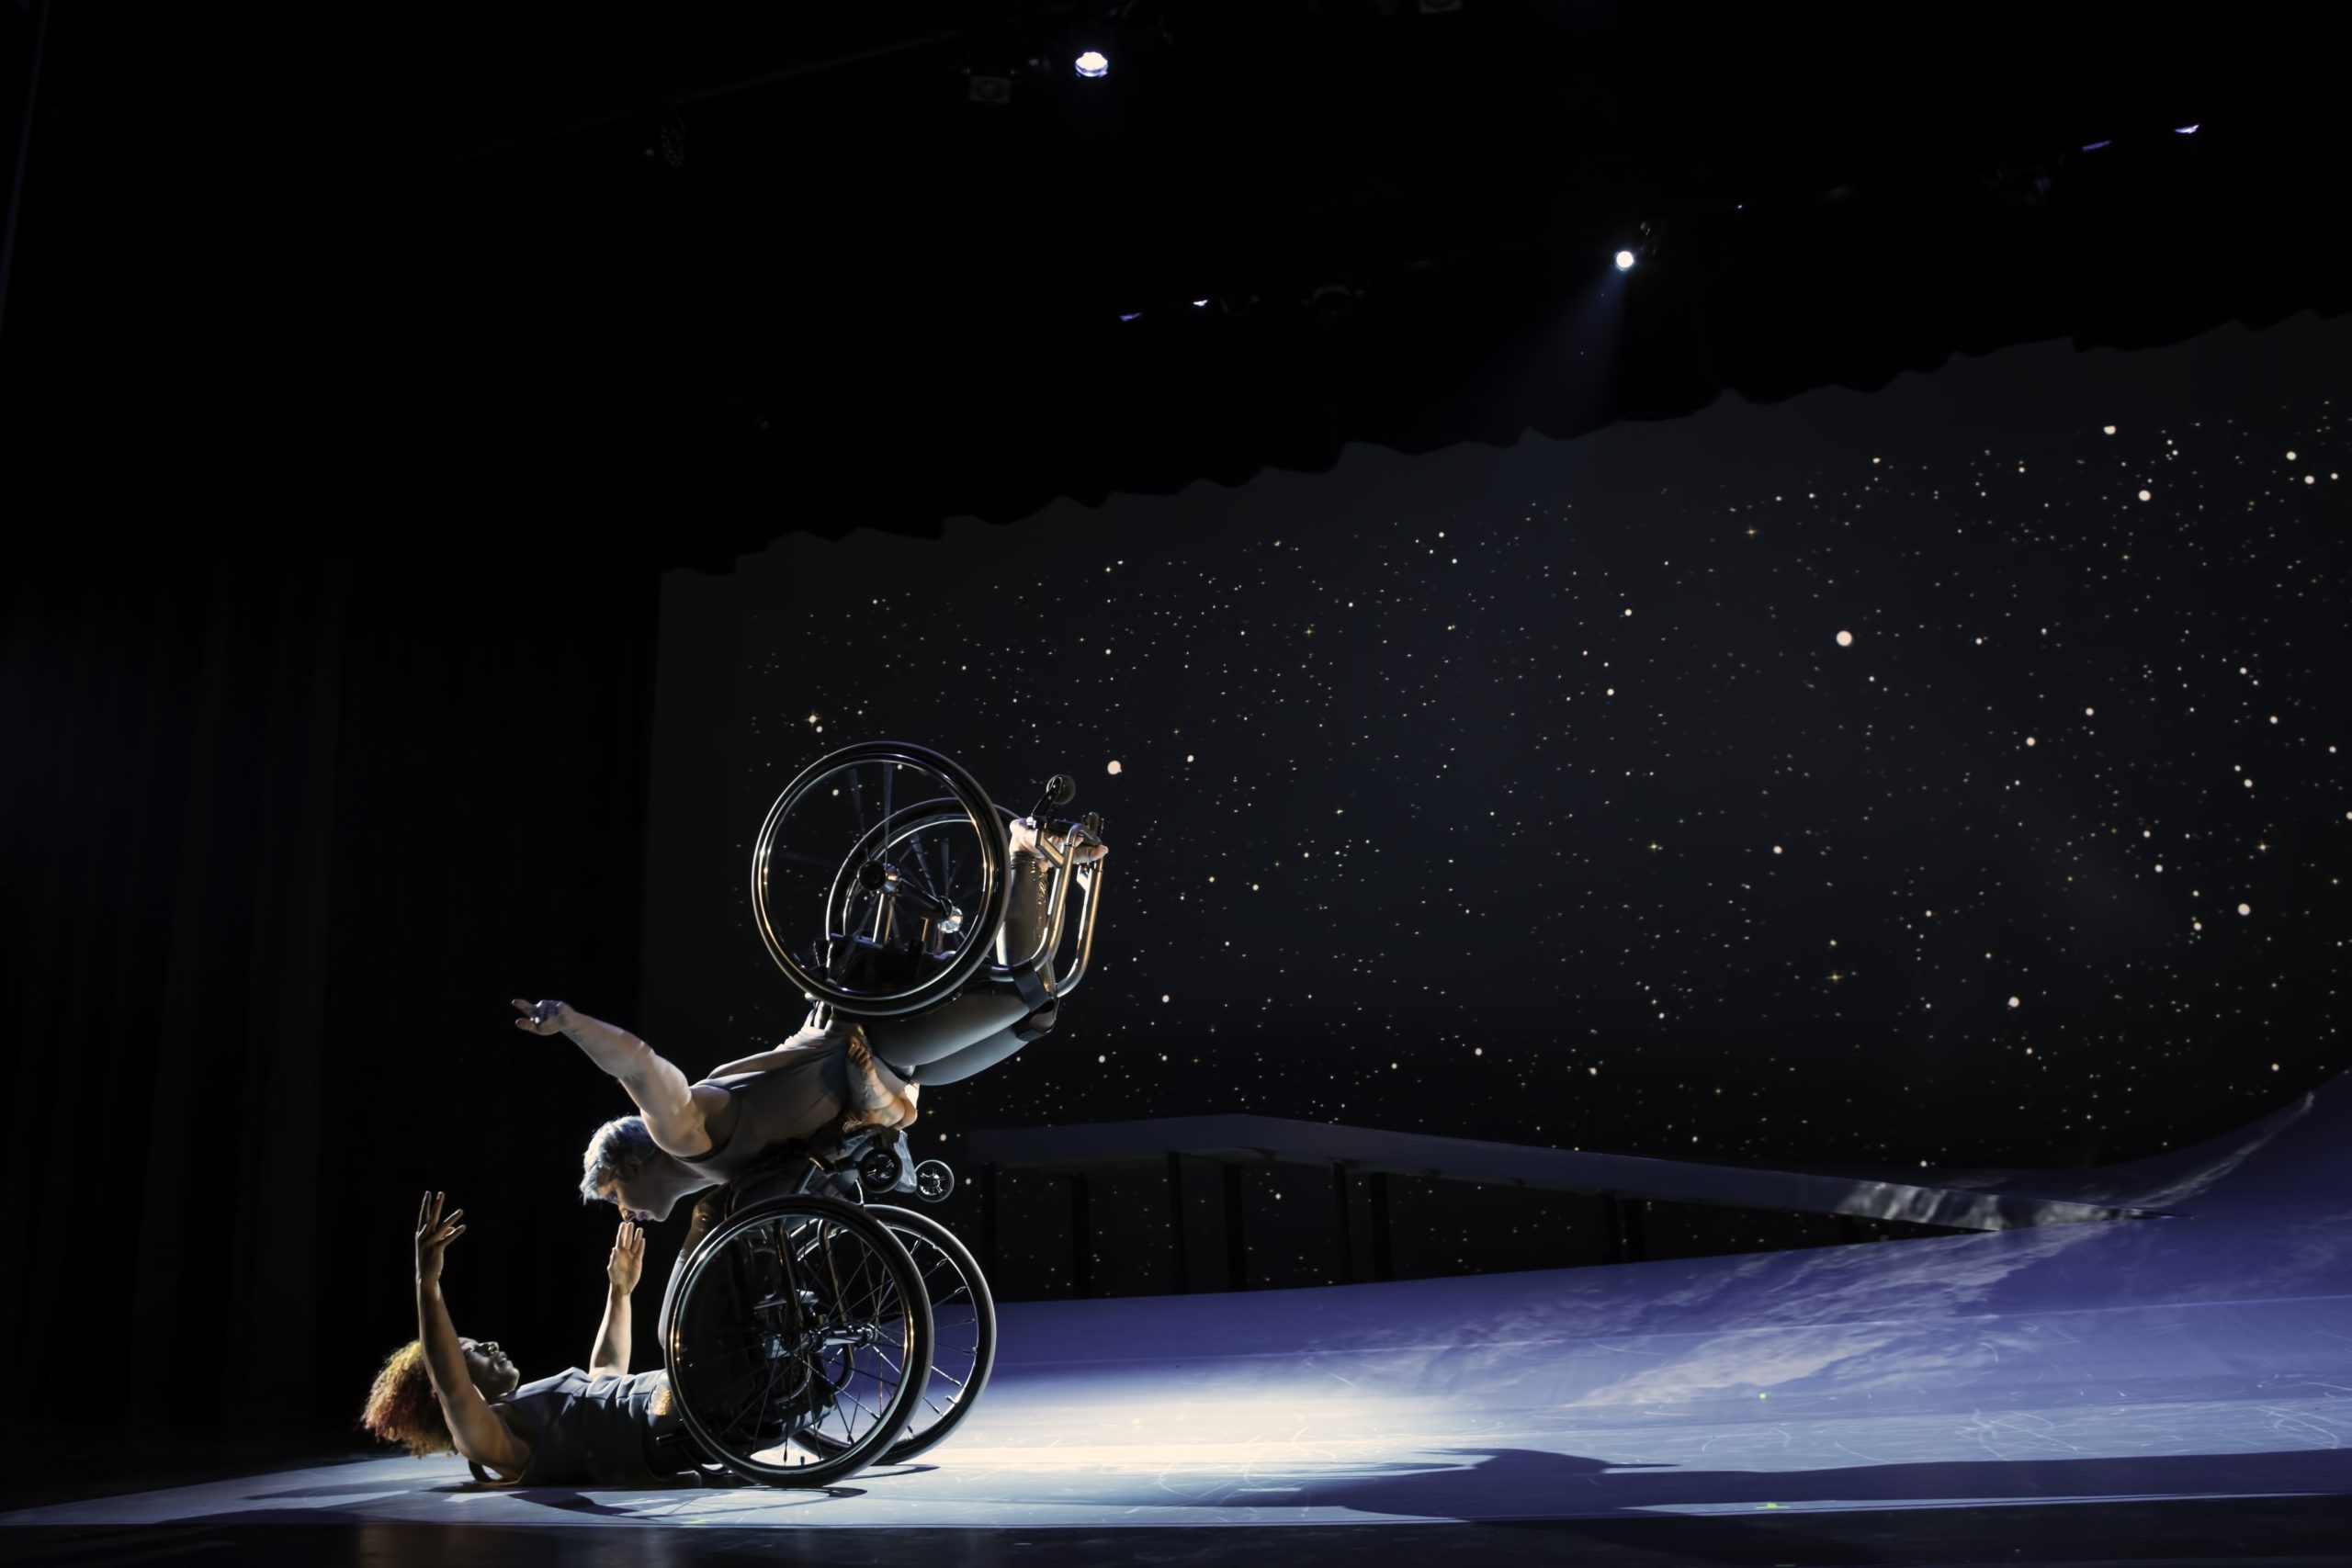 Laurel Lawson, a white dancer, balances on Alice Sheppard’s footplate, with arms spread wide, wheels spinning. Alice, a multiracial Black woman with coffee-colored skin, opens her arms wide to receive her in an embrace. A starry sky fills the background, and moonlight glints off their rims. Photo by BRITT / Jay Newman.